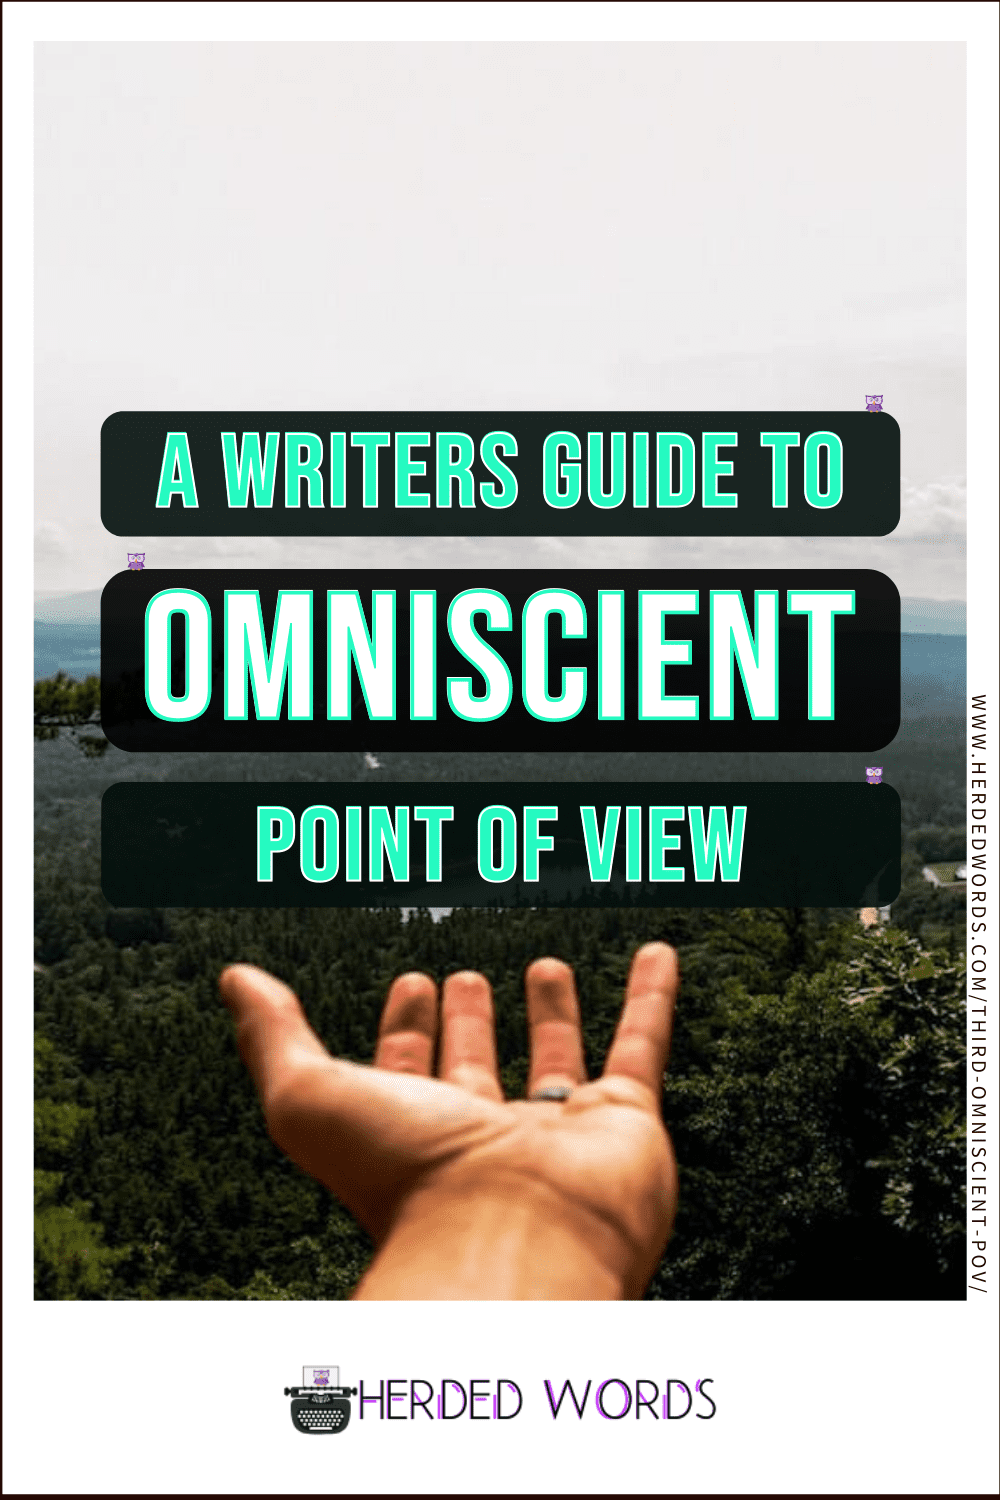 Image link to a writer's guide to Omniscient point of view